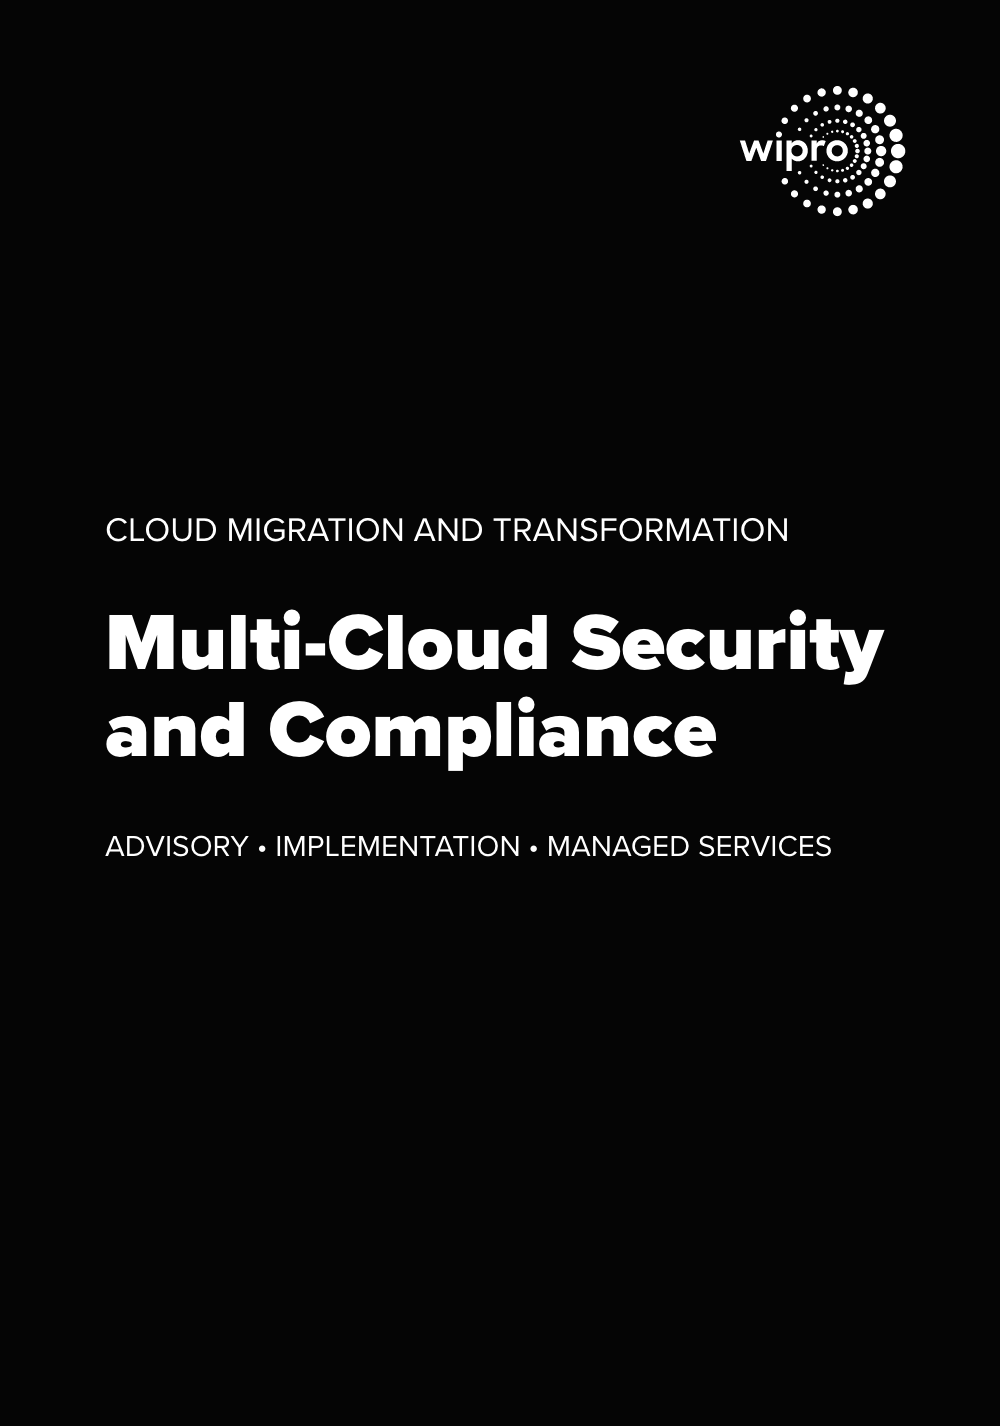 Multi-Cloud Security and Compliance Services